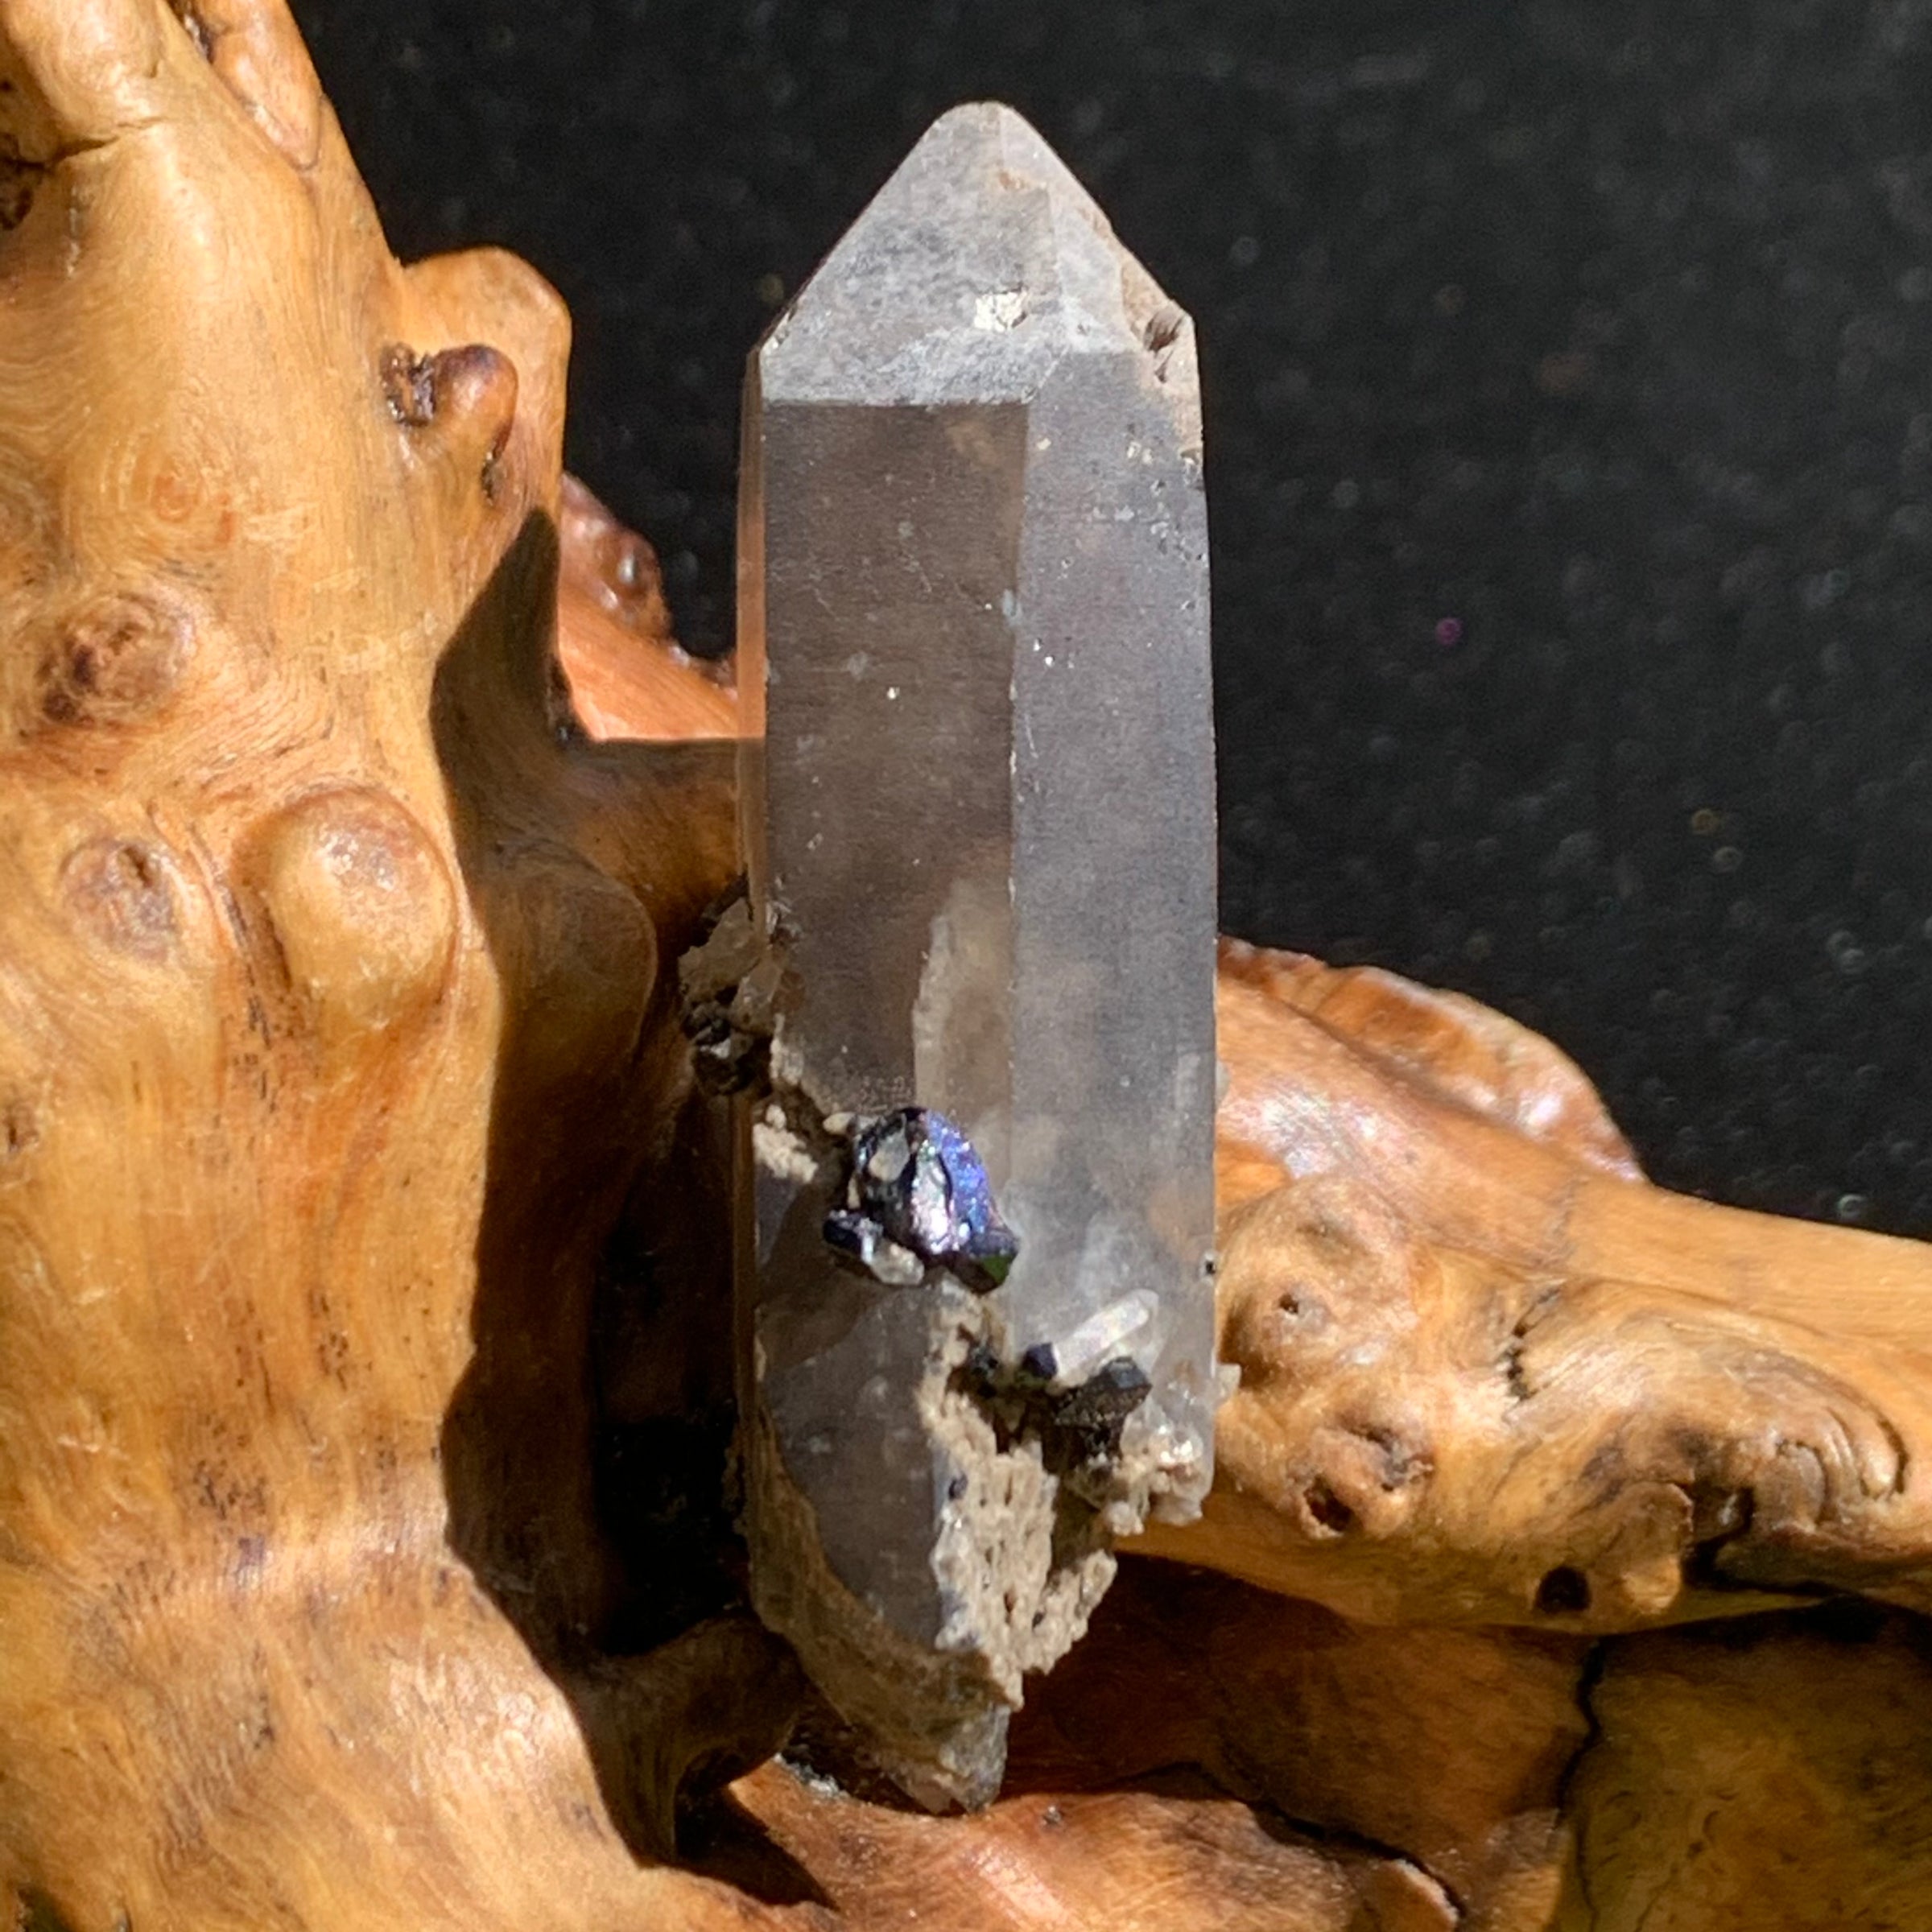 medium, small, and tiny brookite crystals on a smokey quartz point sitting on driftwood for display